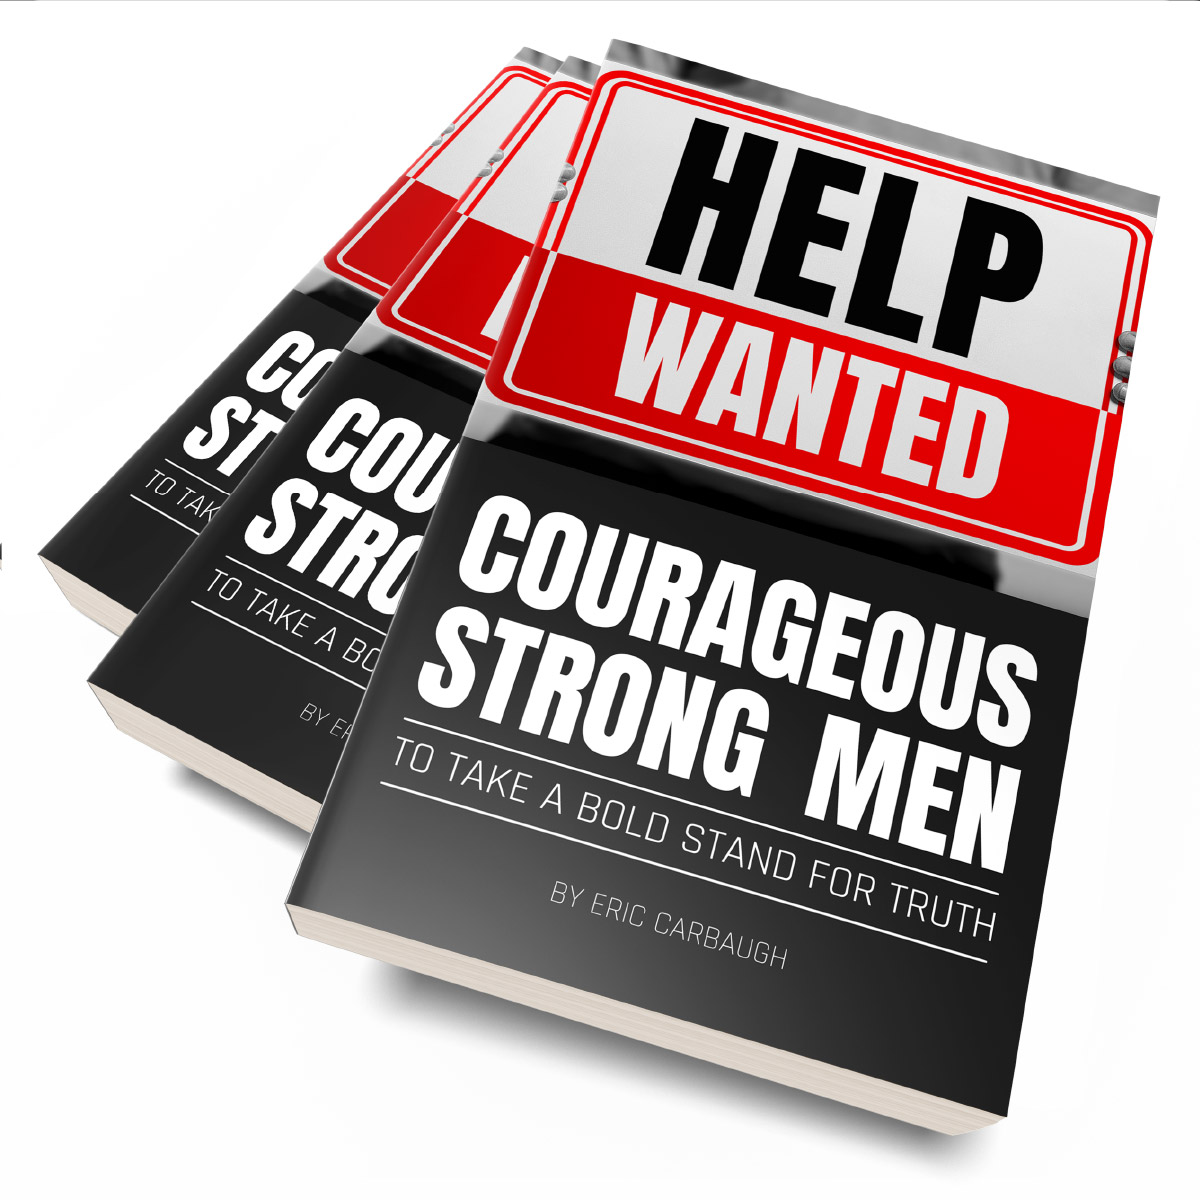 Book - Help Wanted, Courageous & Strong Men... - by Eric Carbaugh